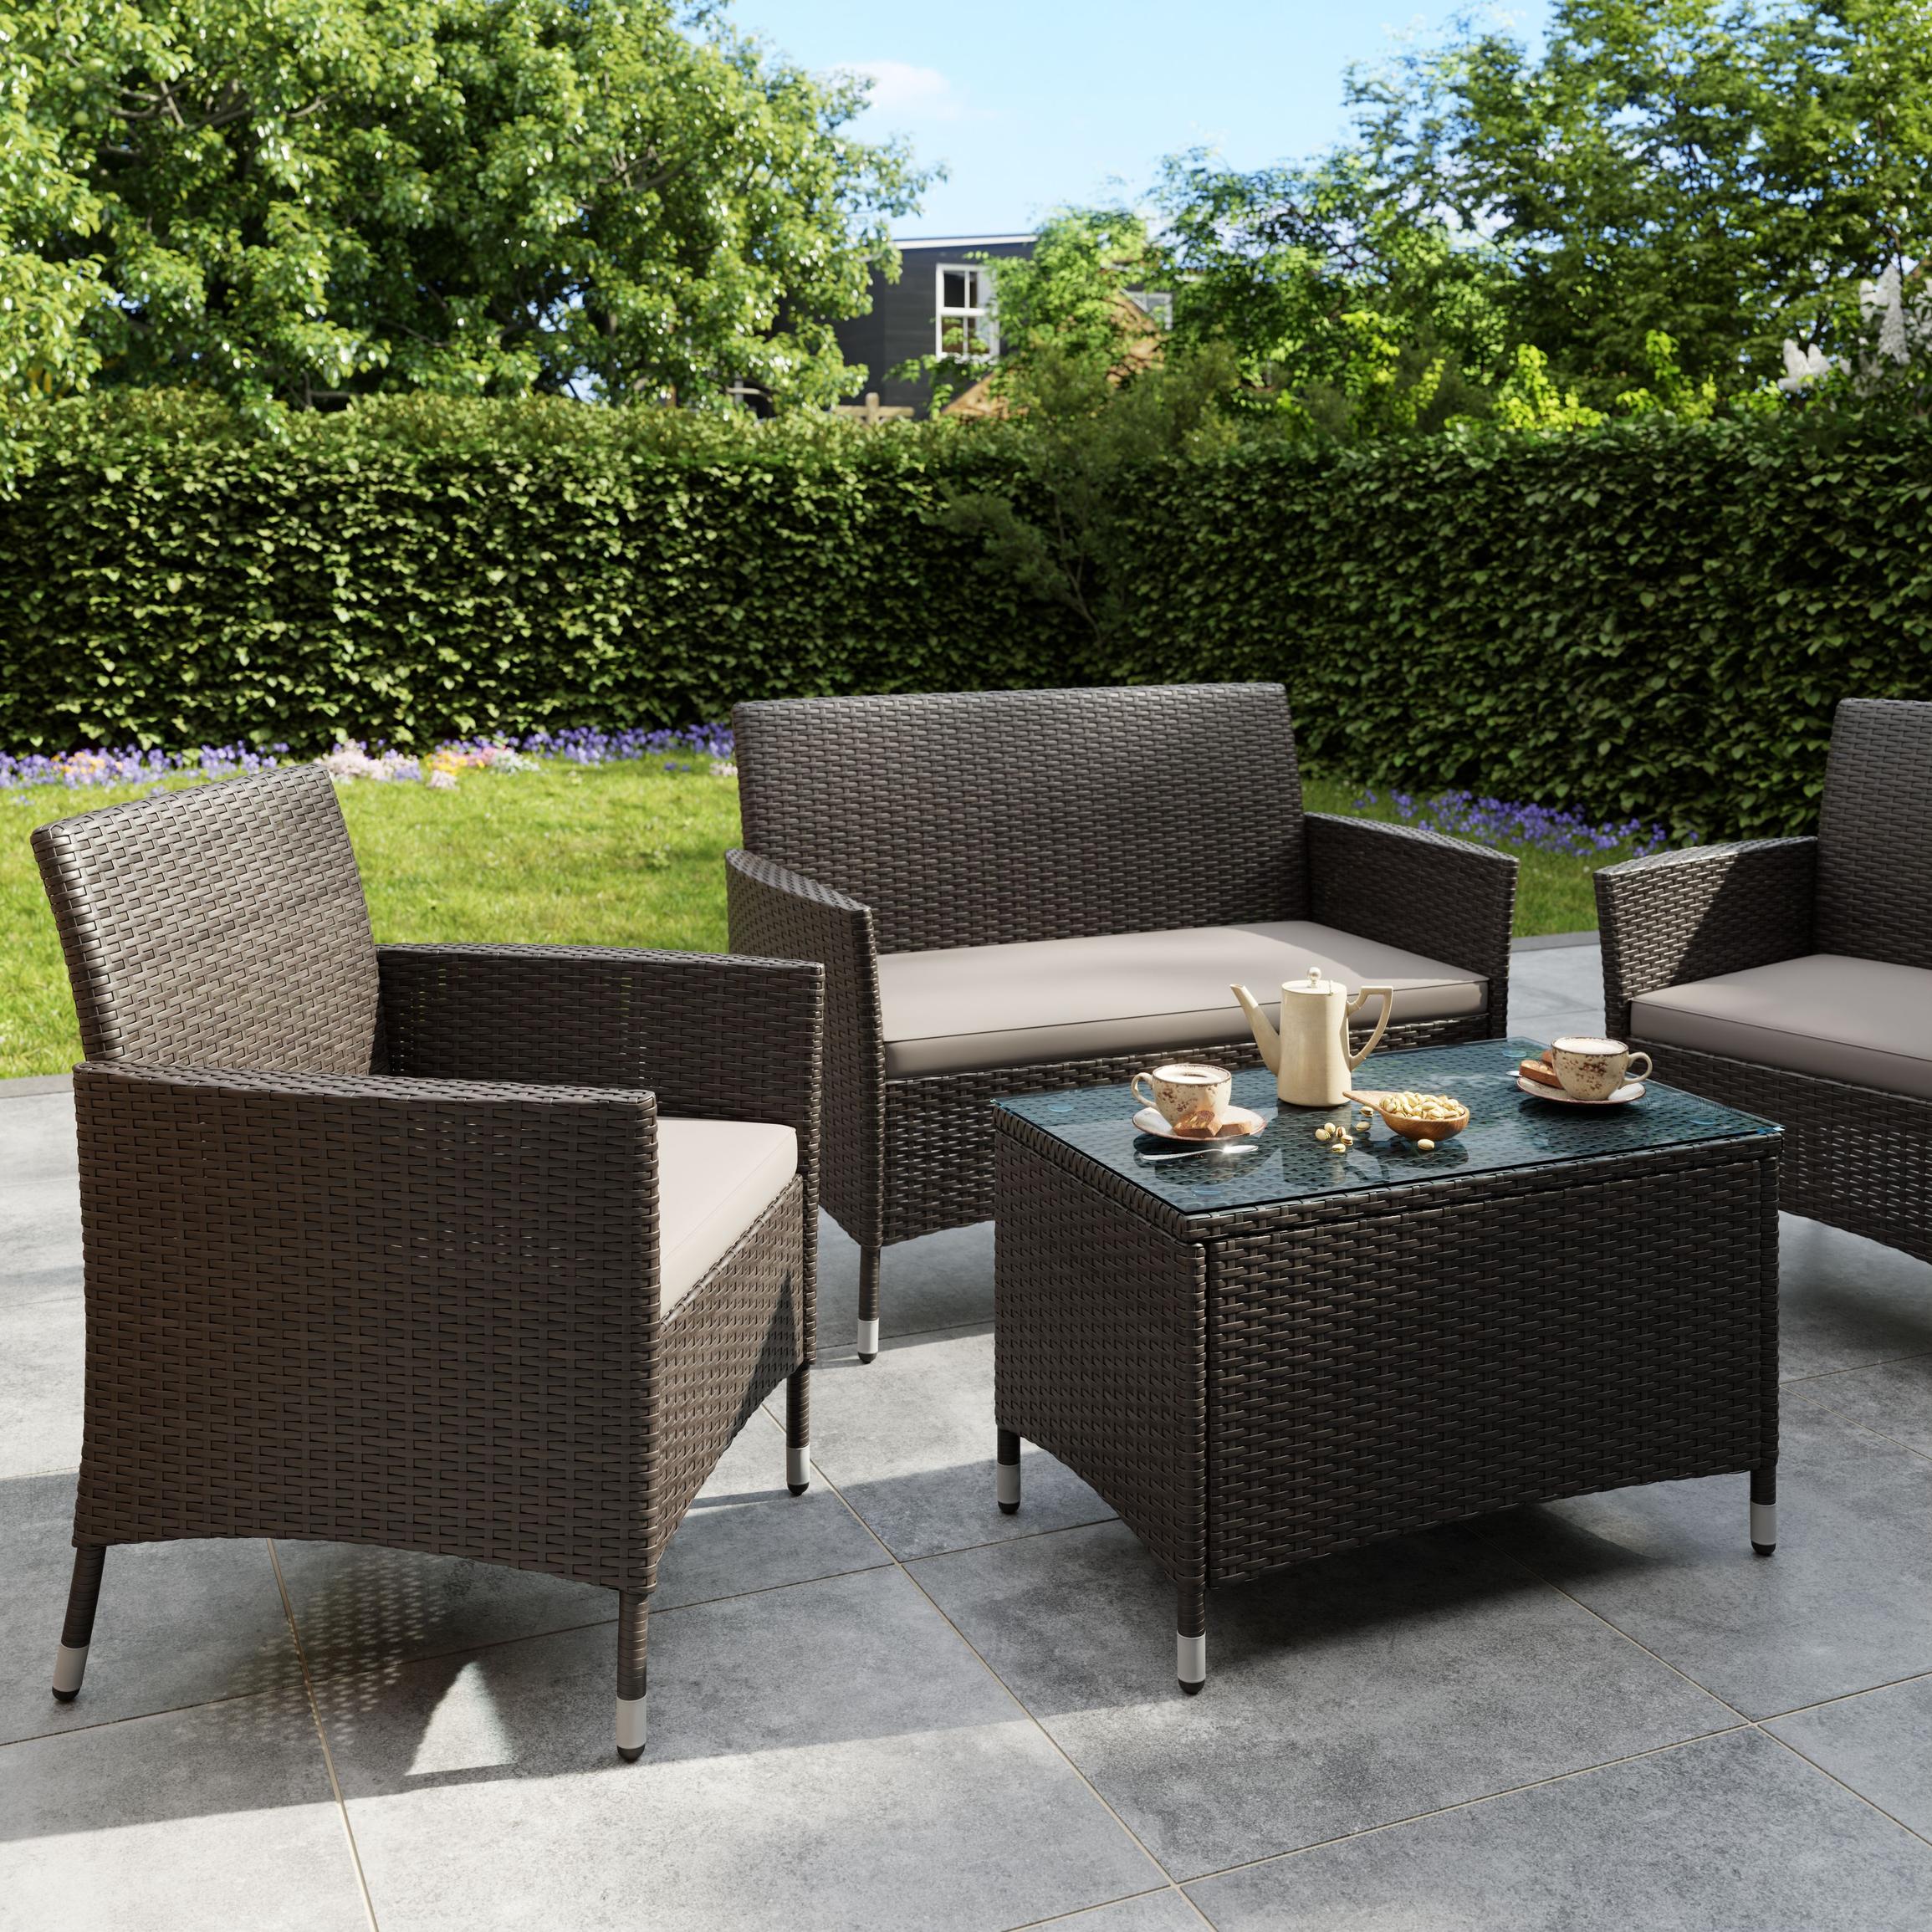 Derry Light black Rattan effect 4 Seater Coffee set offers at £120 in B&Q